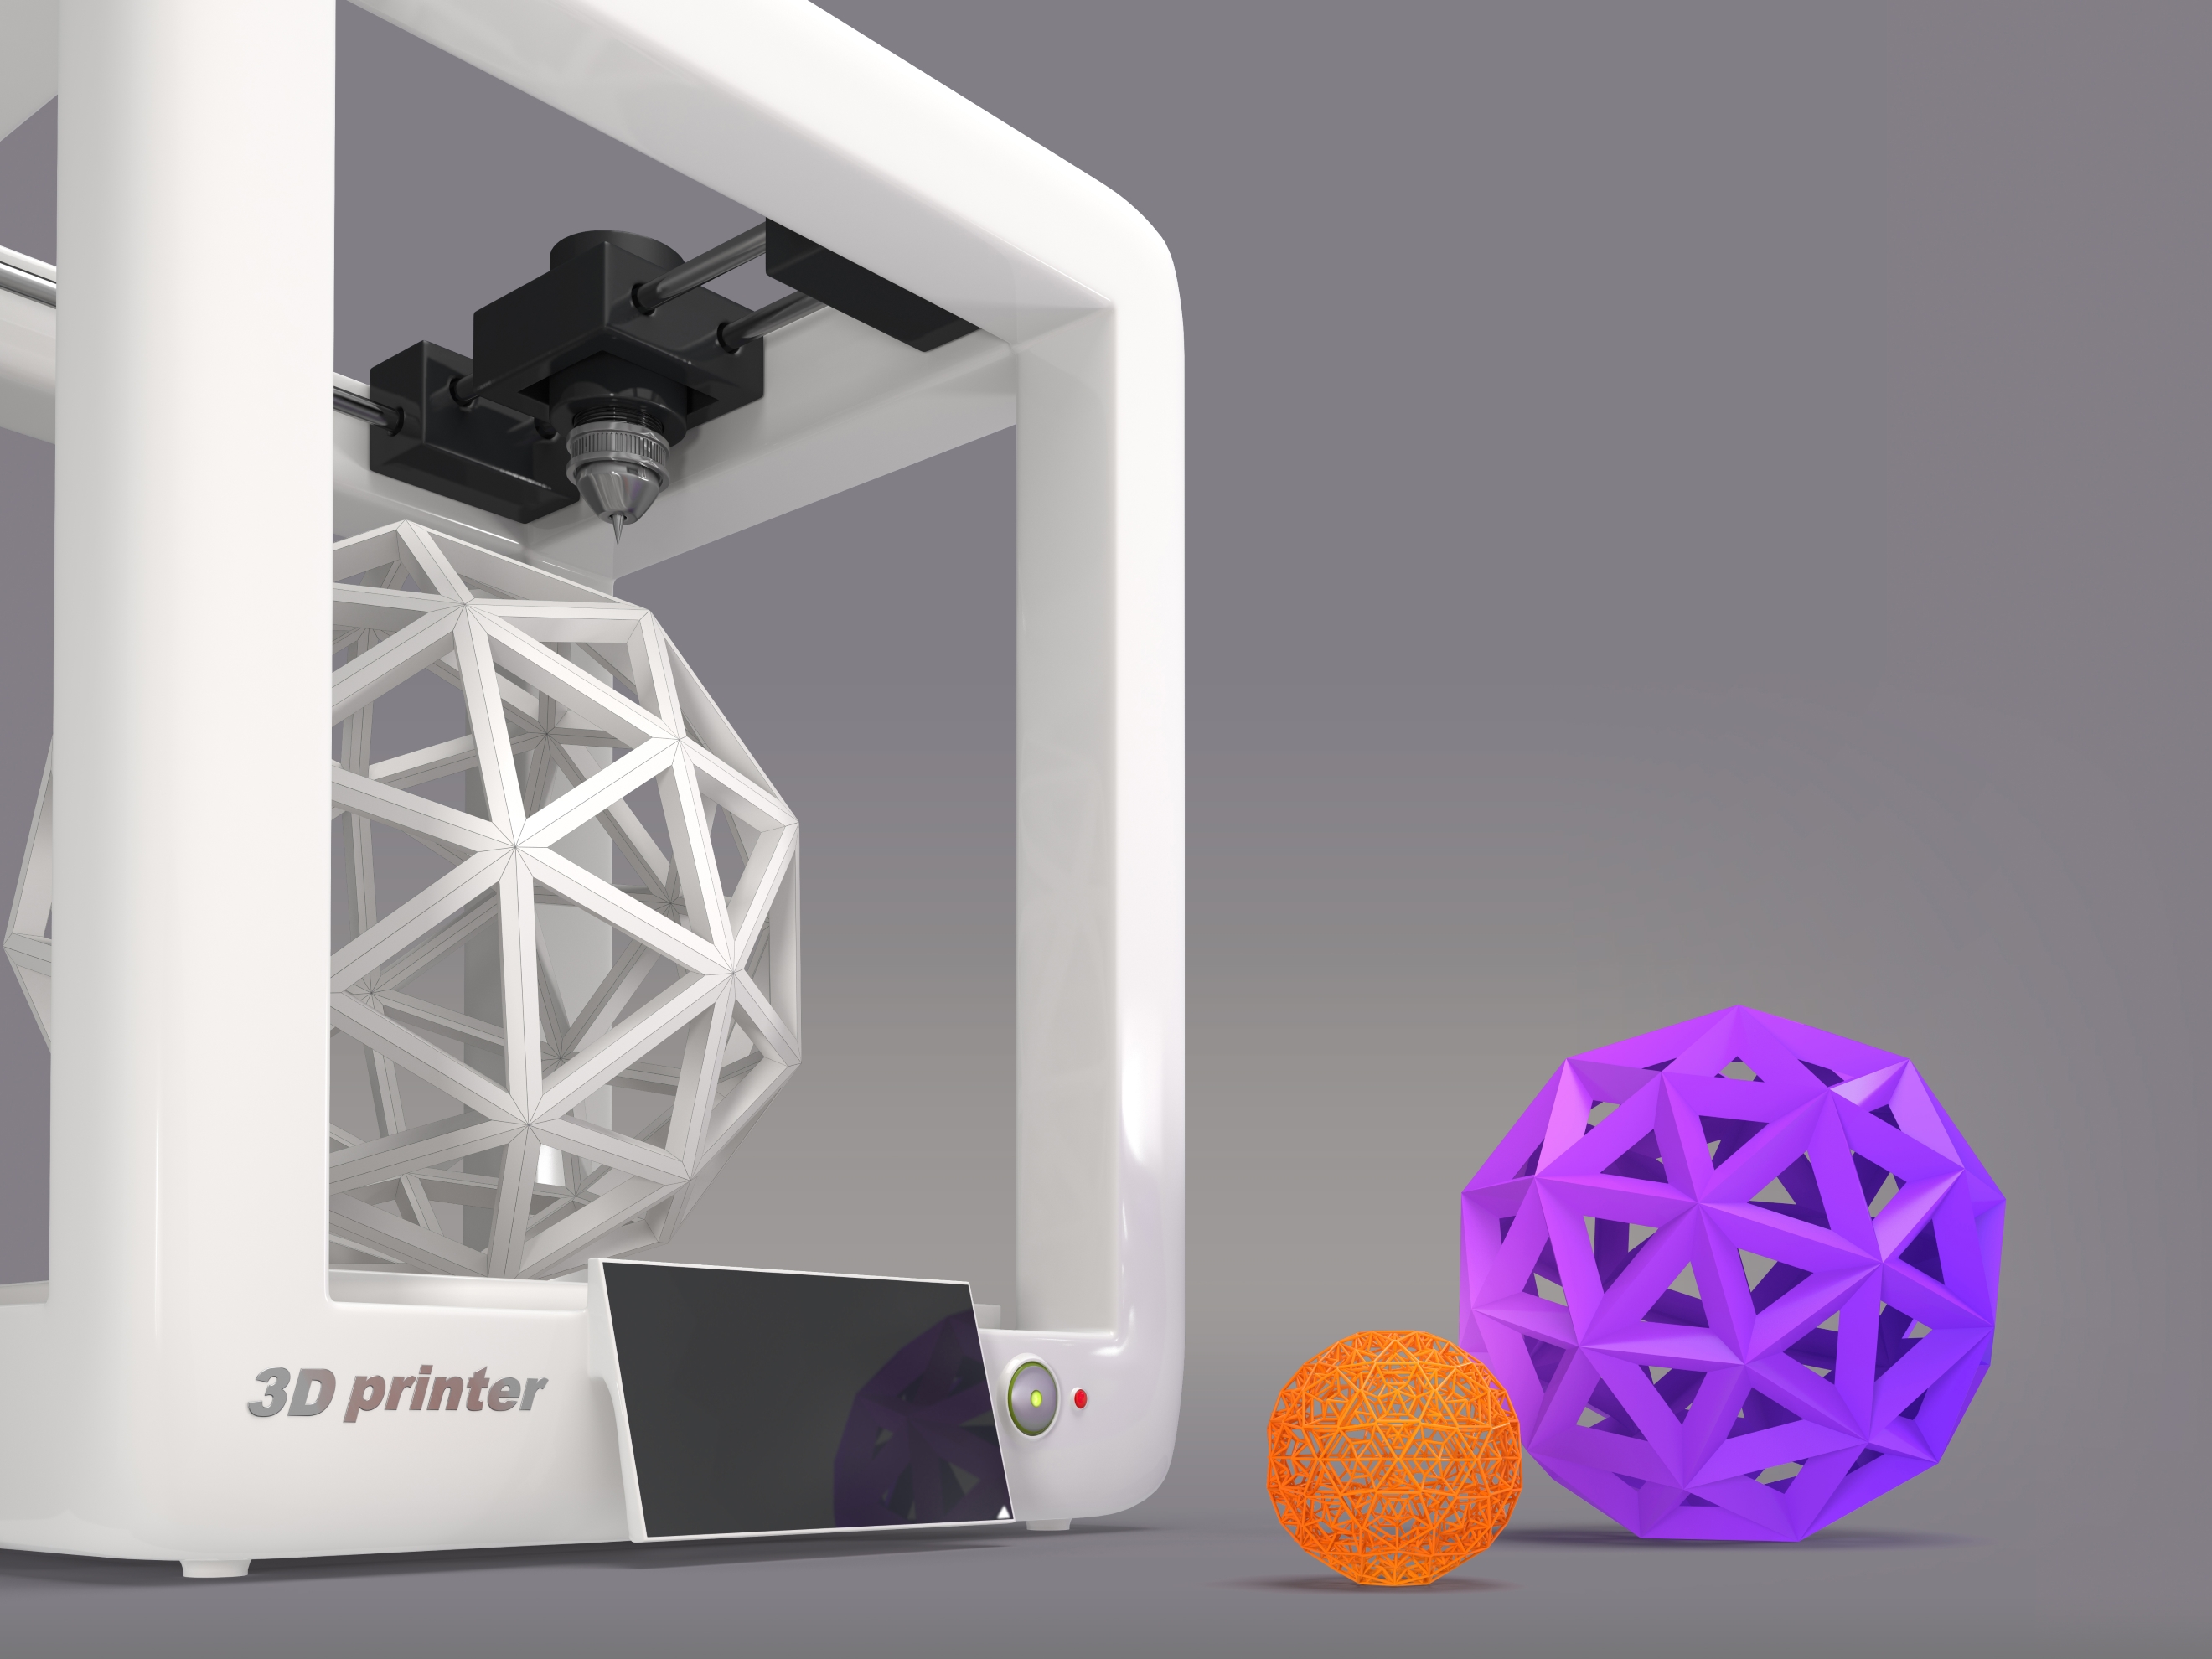 The technology could help improve the mechanical and thermal properties of 3D printed items.